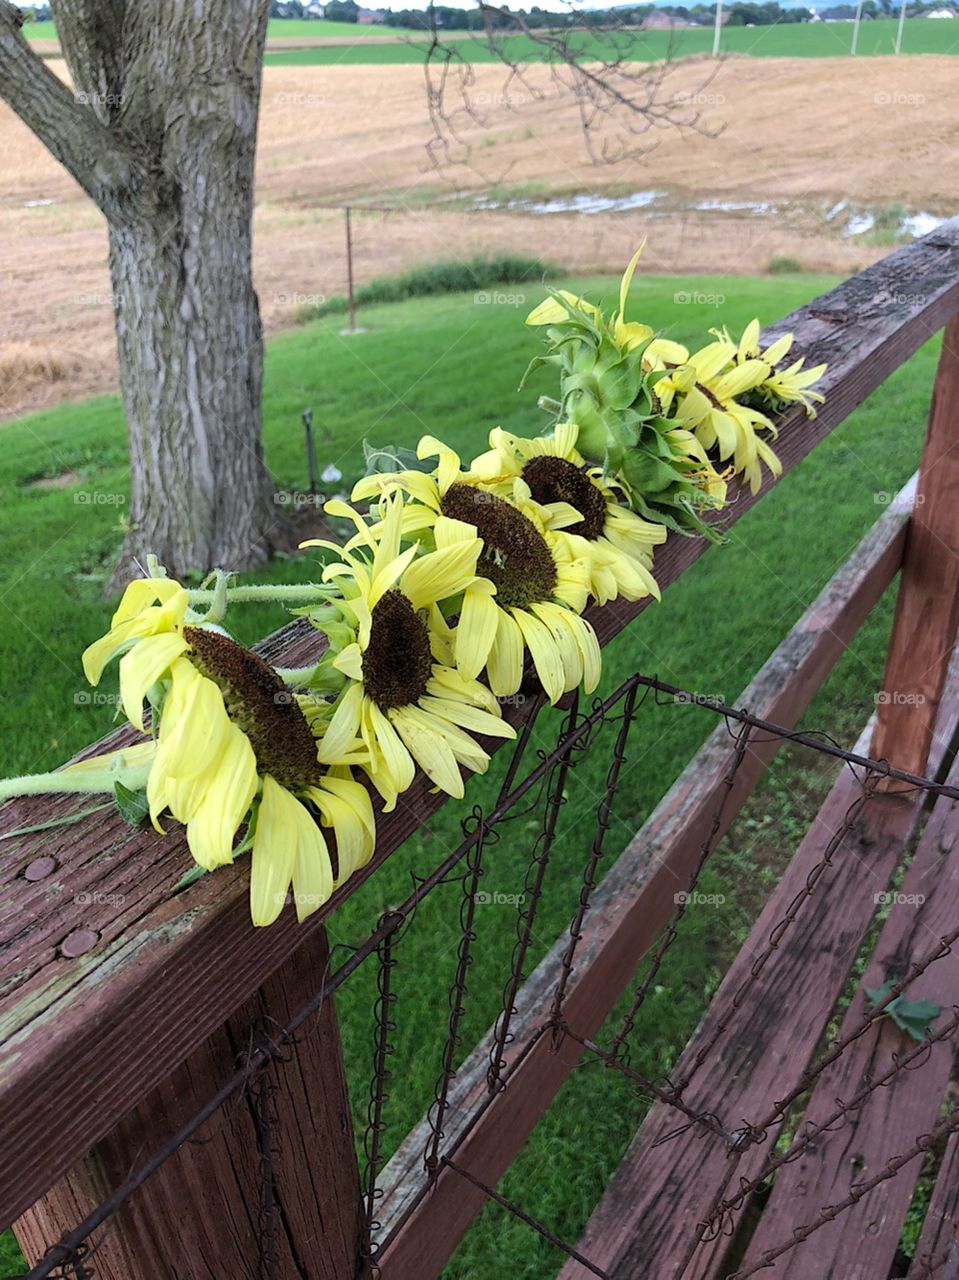 Sunflowers on old wood farmhouse decking and chicken wire flower boxes 